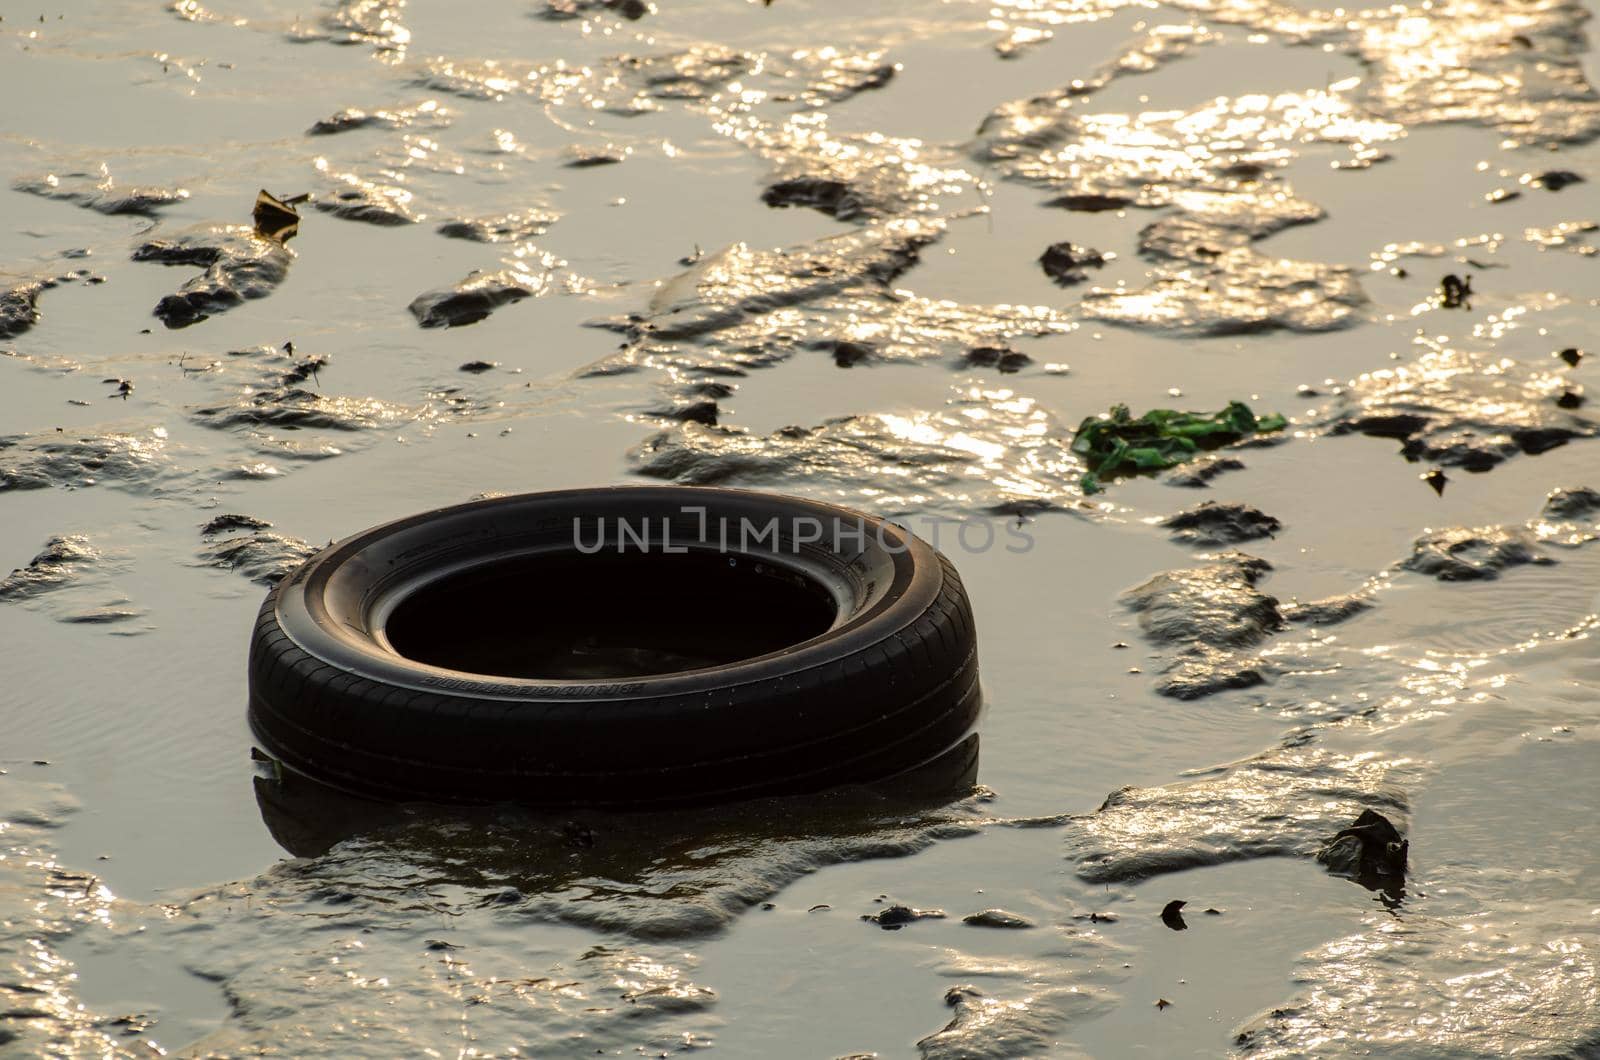 Batu Maung, Penang/Malaysia - Dec 28 2019: Car tire and other rubbish at sea in sunlight morning.